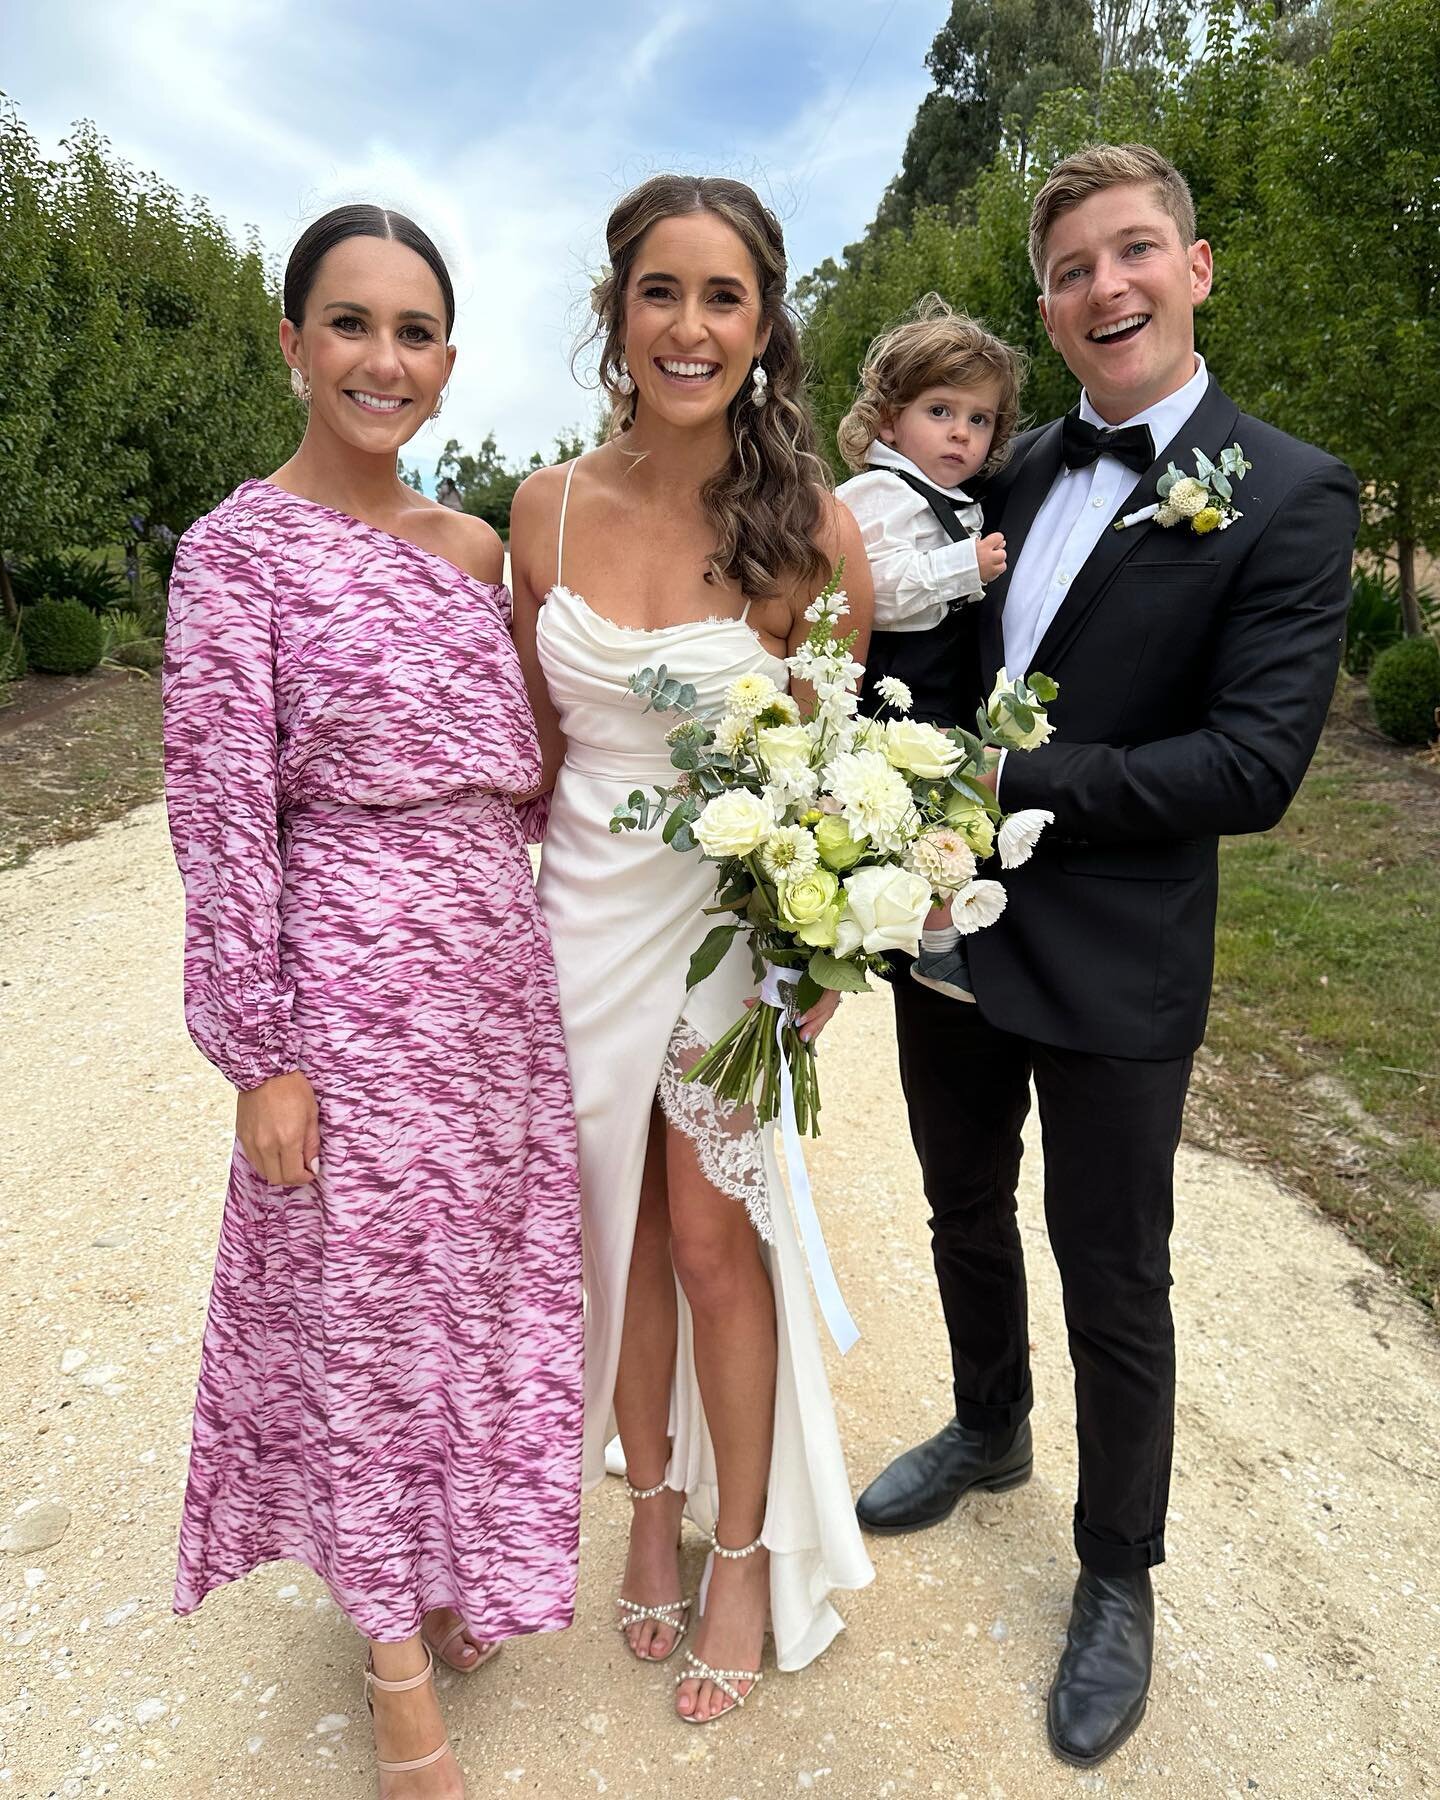 🖤 𝐌𝐫 &amp; 𝐌𝐫𝐬 𝐂𝐚𝐫𝐭𝐞𝐫 🖤

Feeling very lucky to have officiated the wedding of this gorgeous little fam!

Sarah &amp; Morgz you are two of the most gracious, kind and humble humans. 

I dont think I saw either of your faces without those 